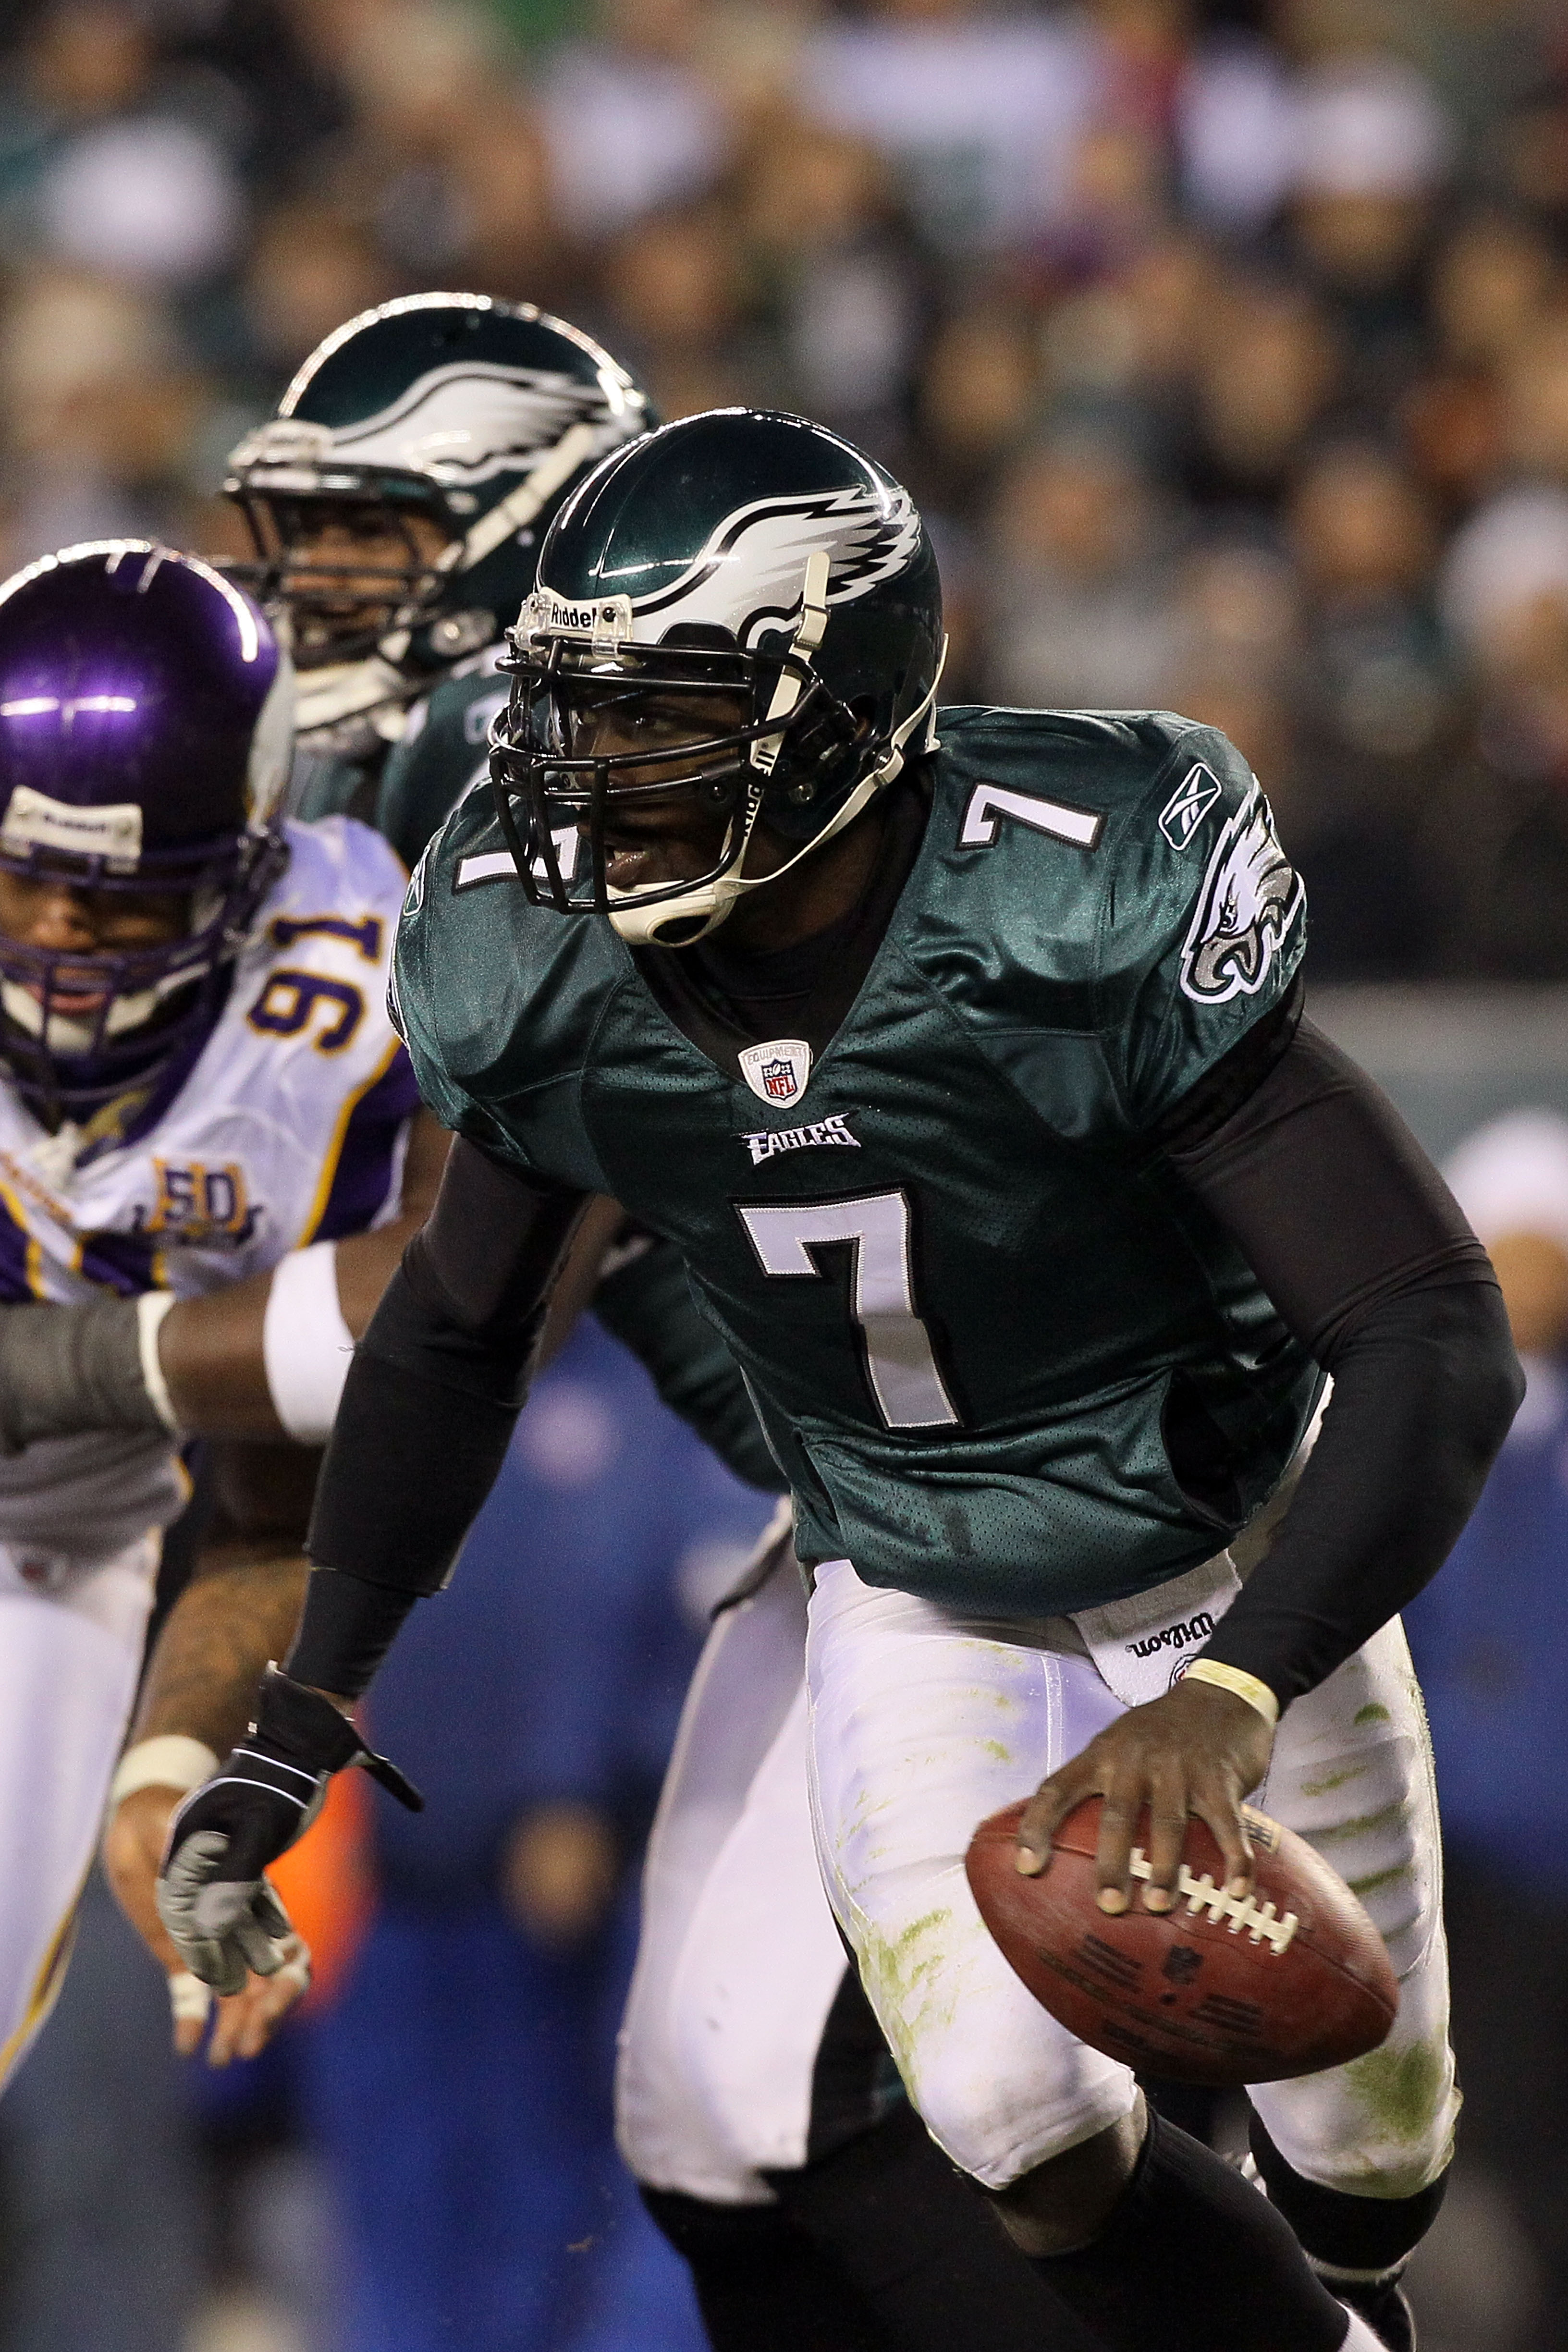 PHILADELPHIA, PA - DECEMBER 28:  Michael Vick #7 of the Philadelphia Eagles in action against the Minnesota Vikings at Lincoln Financial Field on December 26, 2010 in Philadelphia, Pennsylvania.  (Photo by Jim McIsaac/Getty Images)